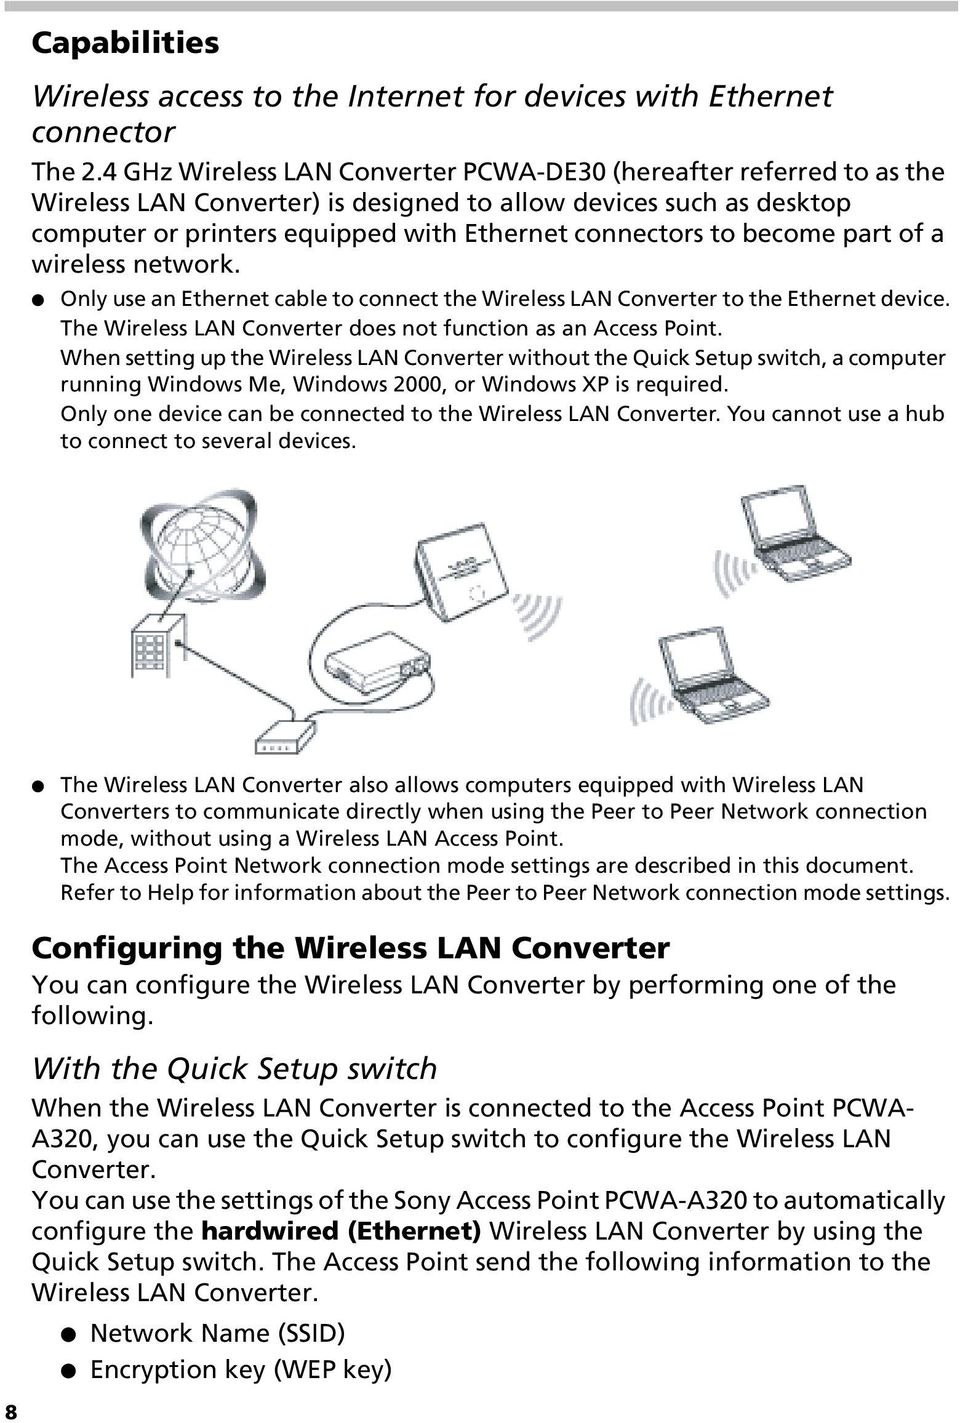 become part of a wireless network. Only use an Ethernet cable to connect the Wireless LAN Converter to the Ethernet device. The Wireless LAN Converter does not function as an Access Point.